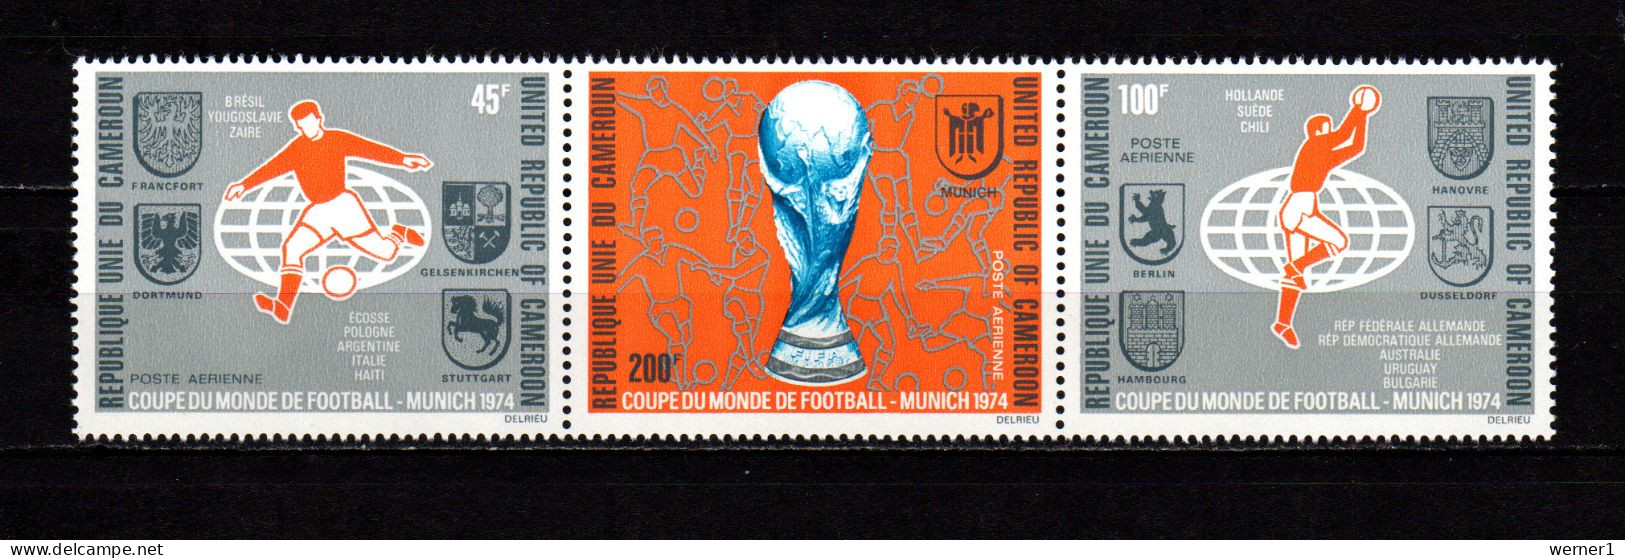 Cameroon - Cameroun 1974 Football Soccer World Cup Strip Of 3 MNH - 1974 – West Germany